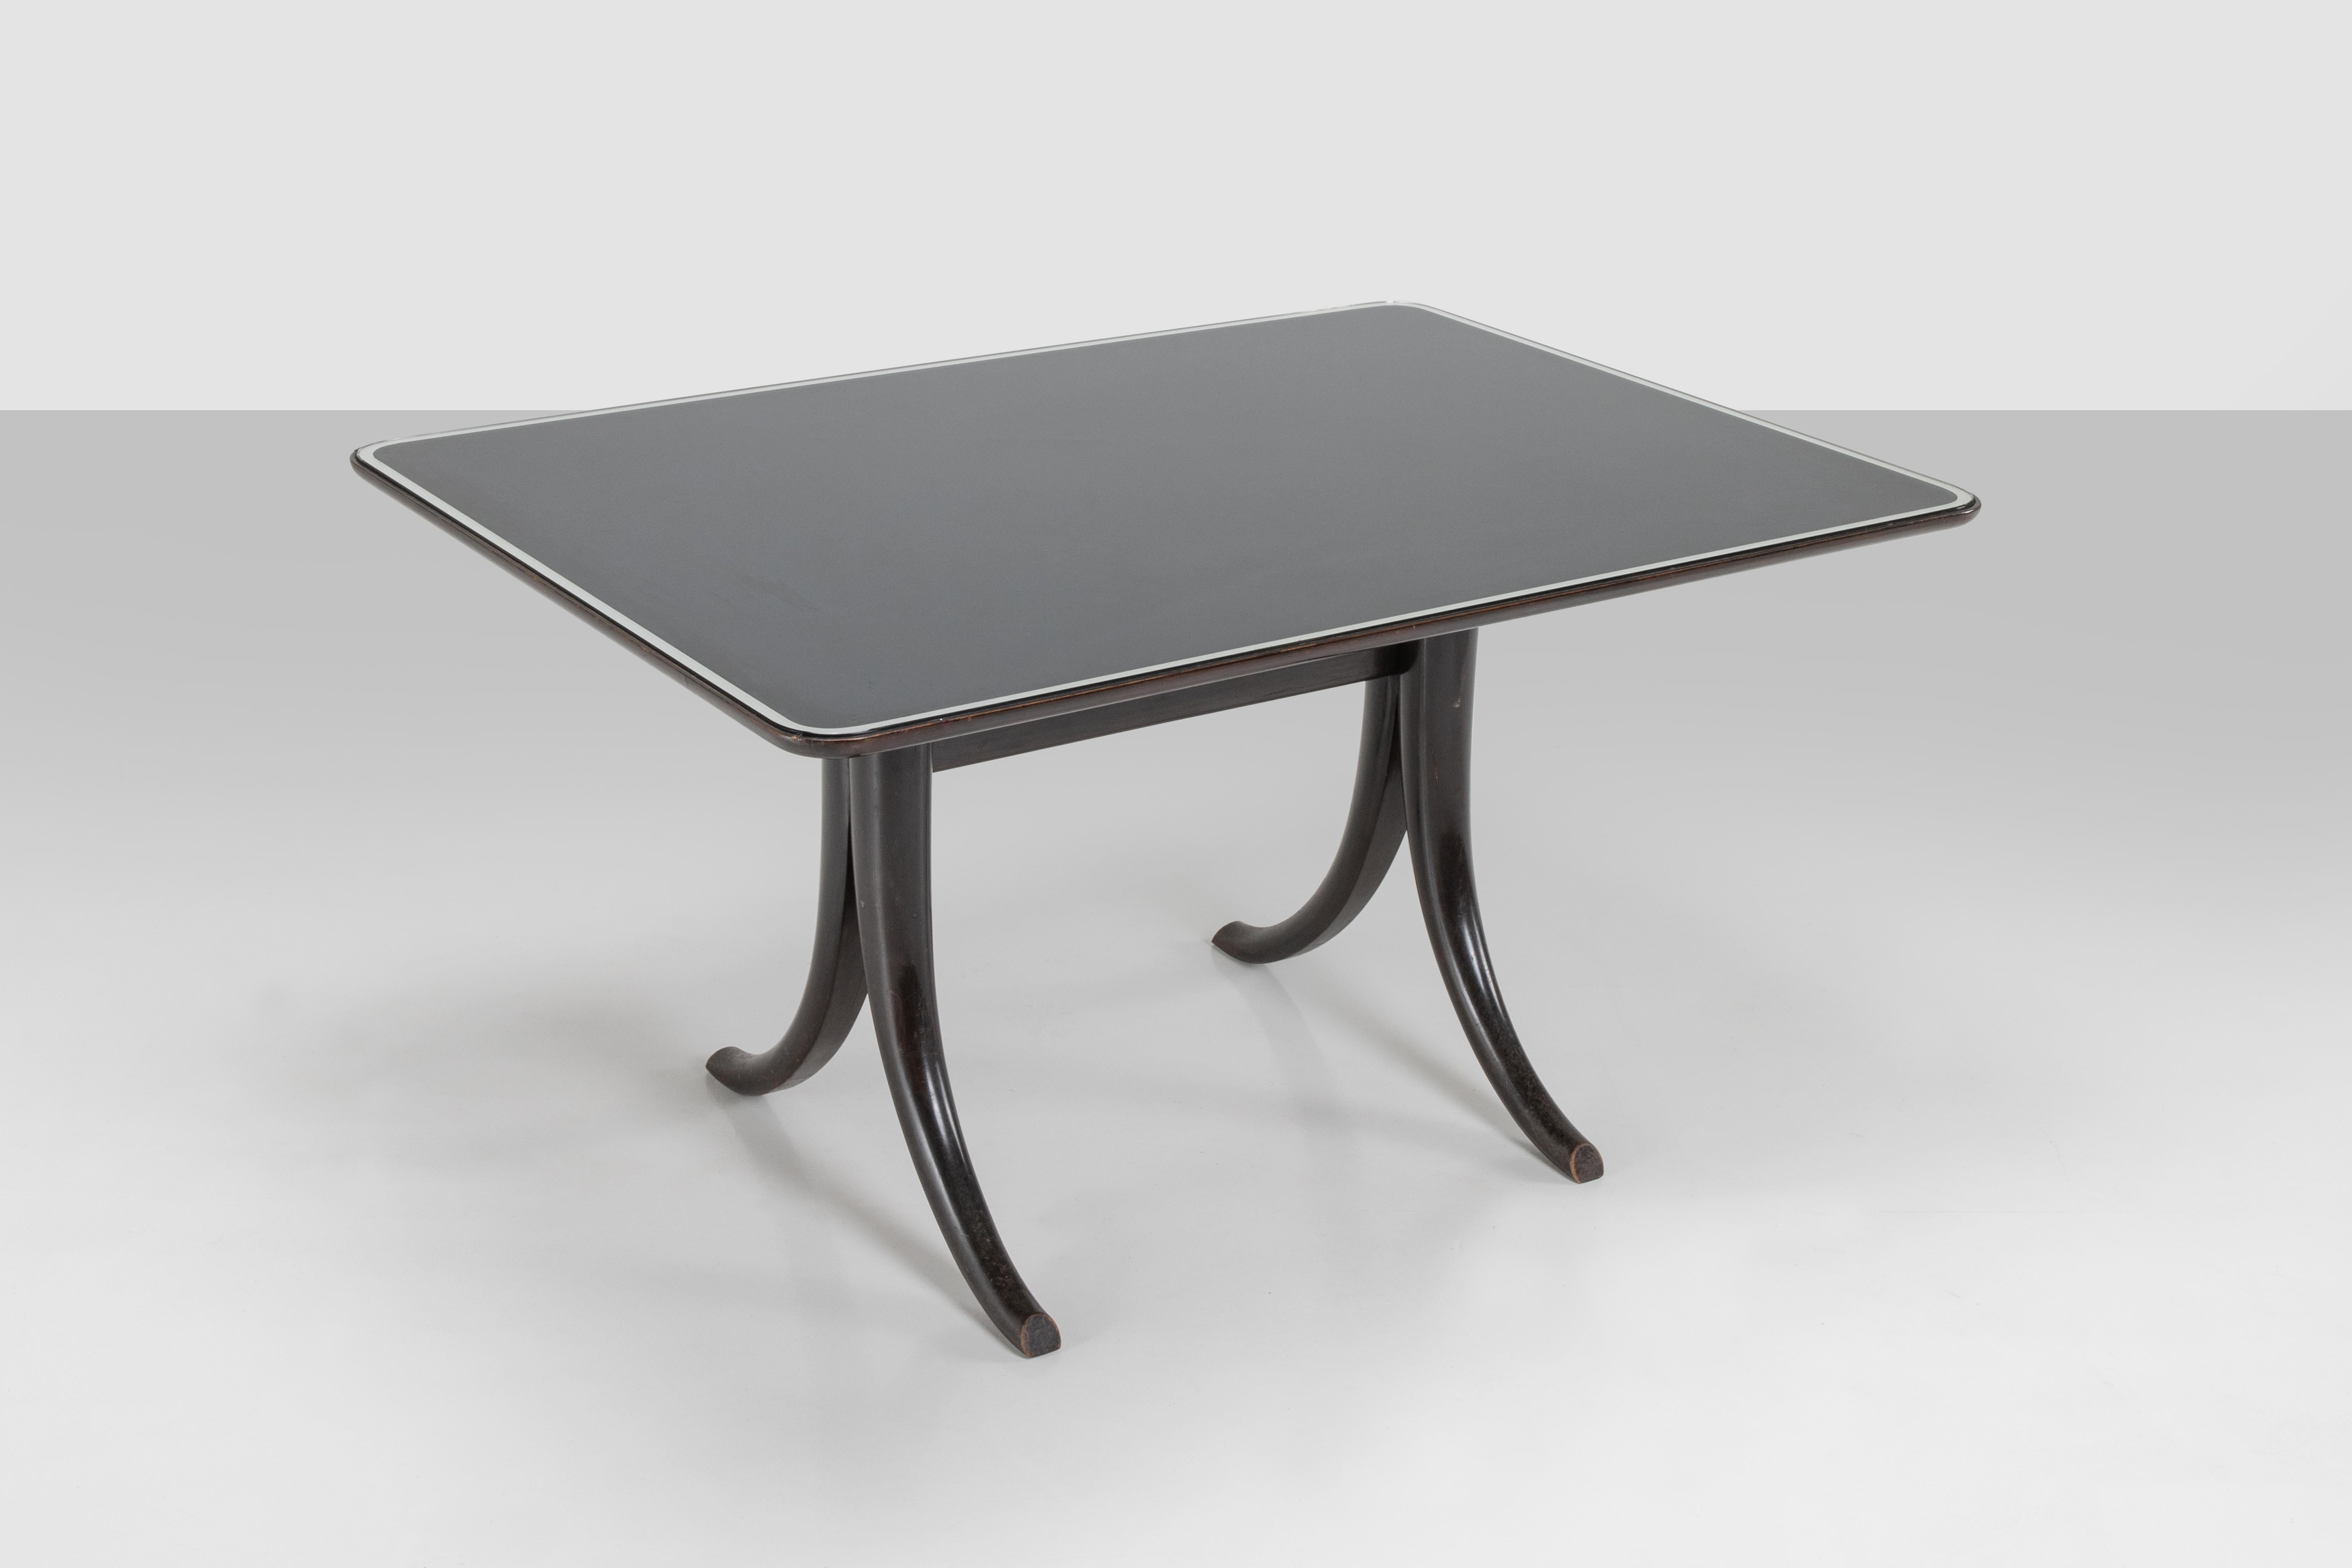 Rare table in ebanized wood with glass top, this piece comes from a private apartment near Venezia where it was with other furnitures of the same elegance. The typical feet brought us to understand the idiosyncratic touch of Pietro Chiesa, one of